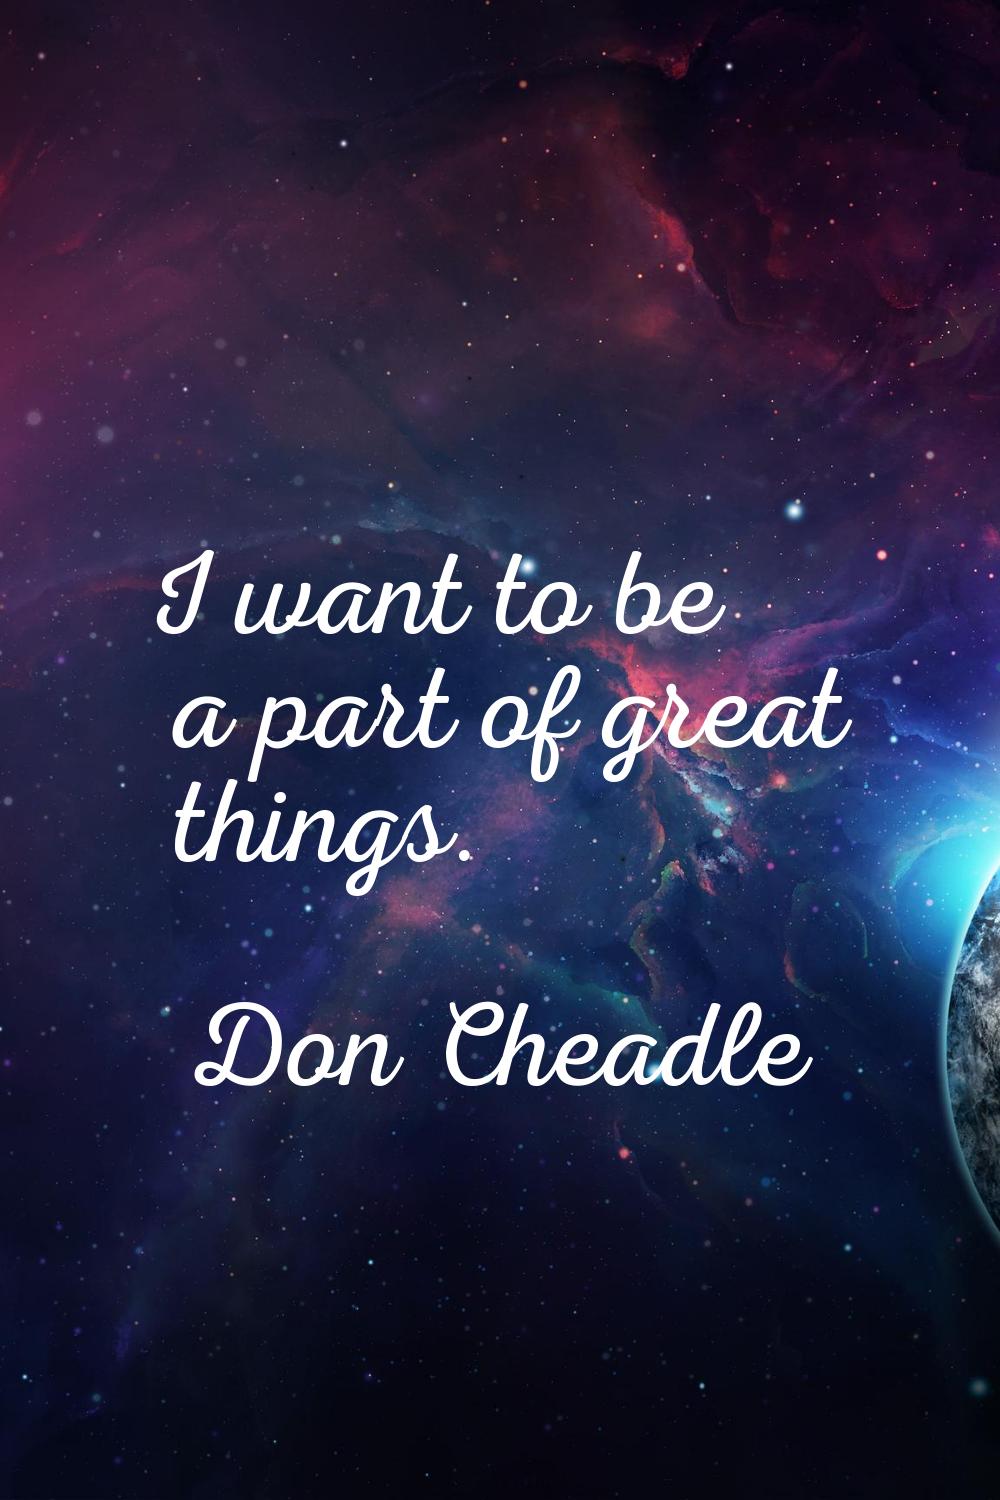 I want to be a part of great things.